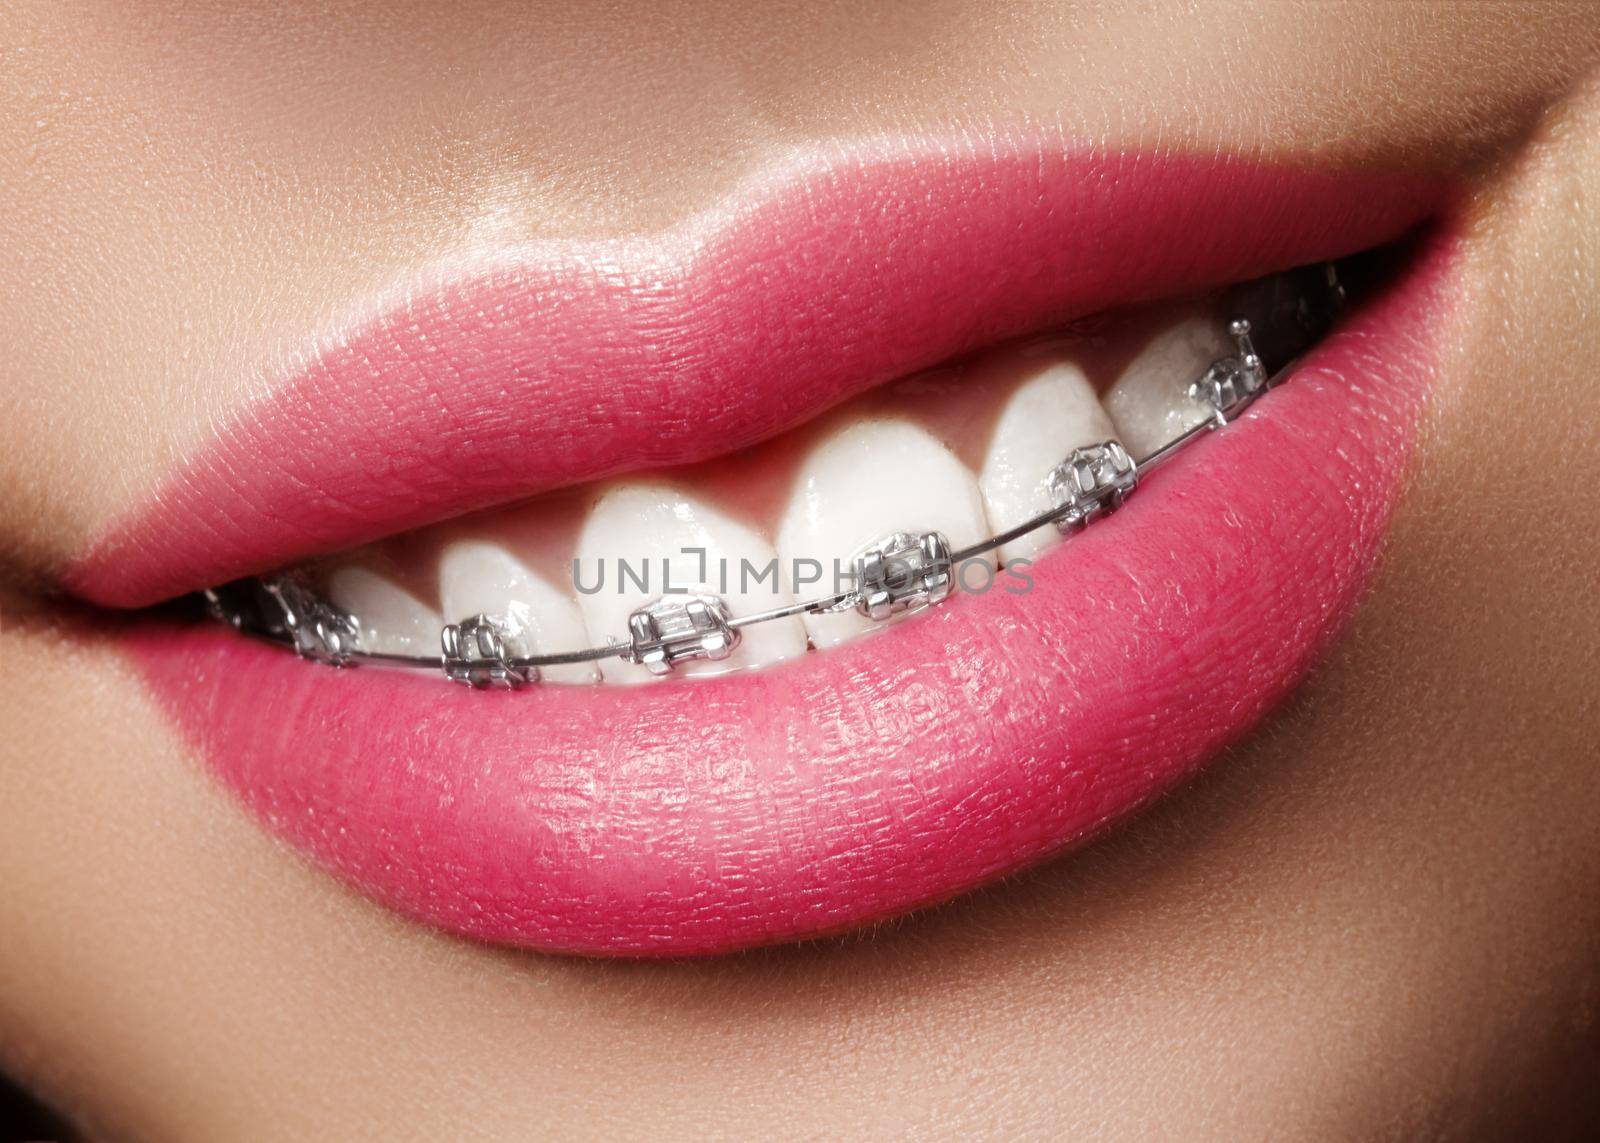 Beautiful White Teeth with Braces. Dental Care Photo. Woman Smile with Ortodontic Accessories. Orthodontics Treatment by MarinaFrost